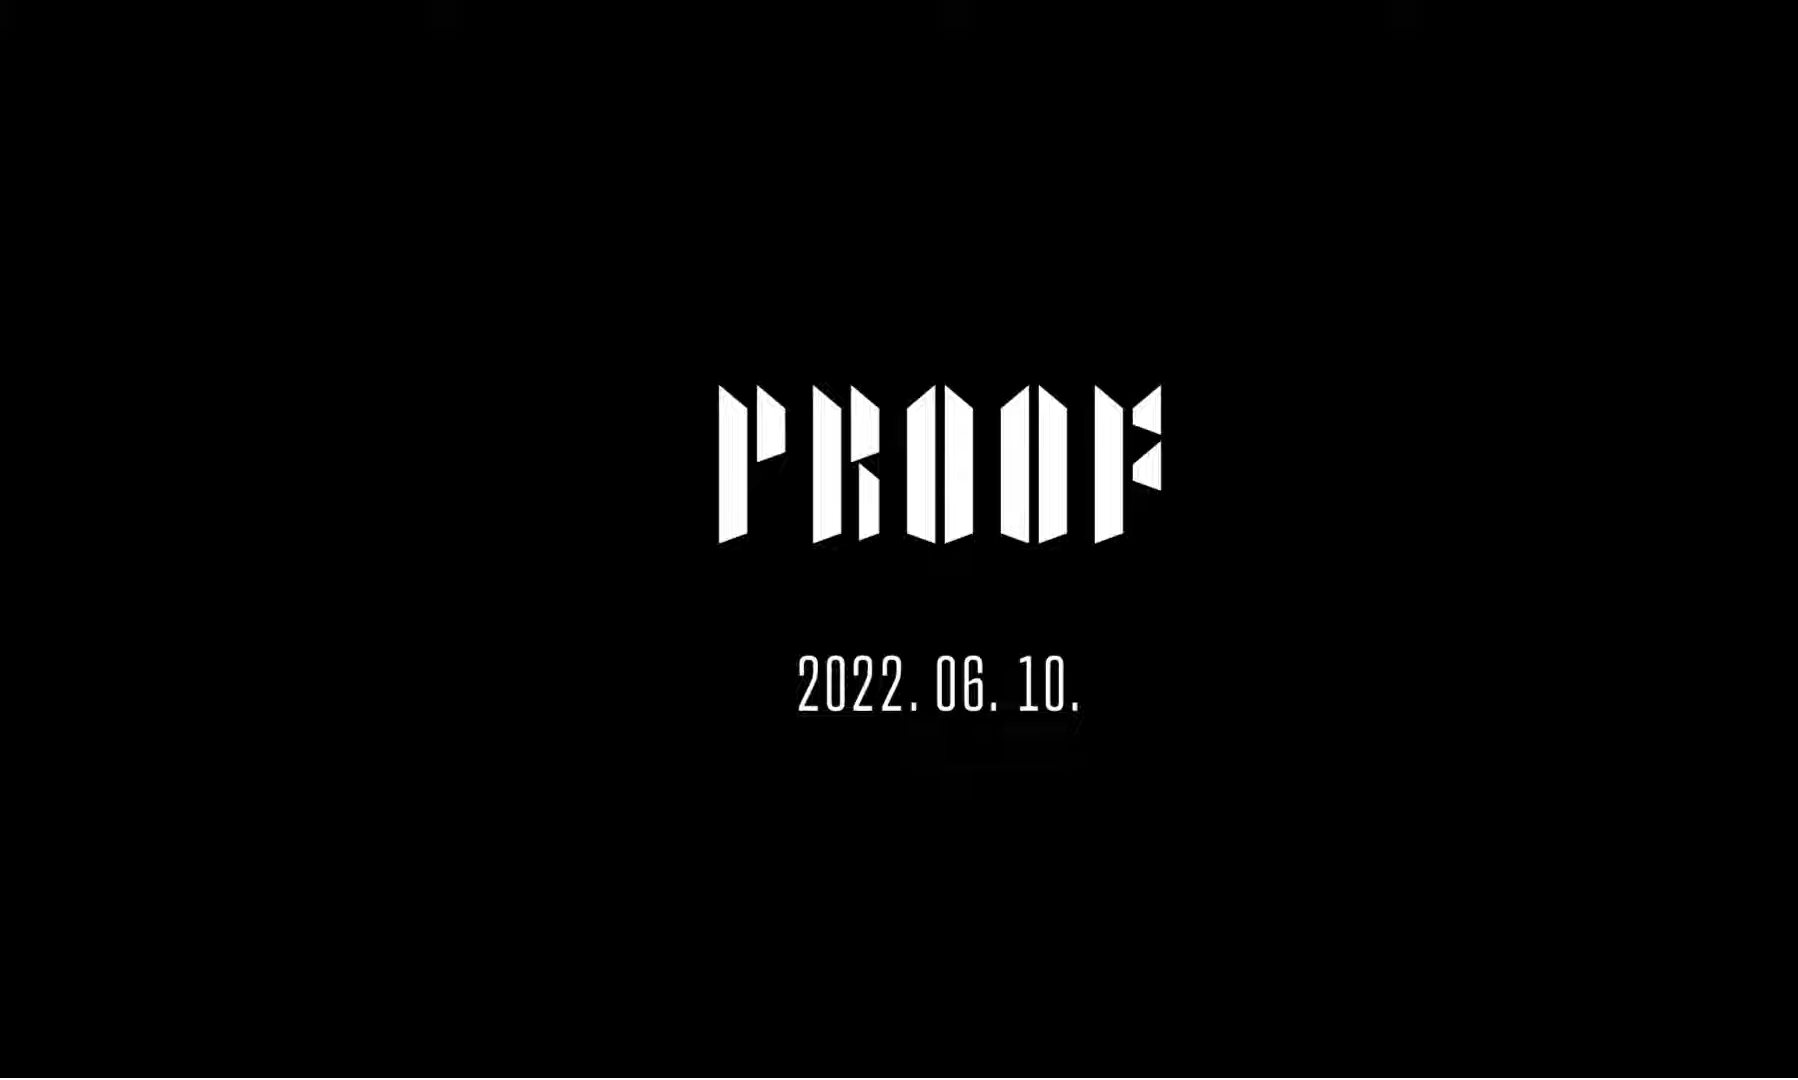 BTS will Release PROOF – Anthology Album on June 10, 2022.